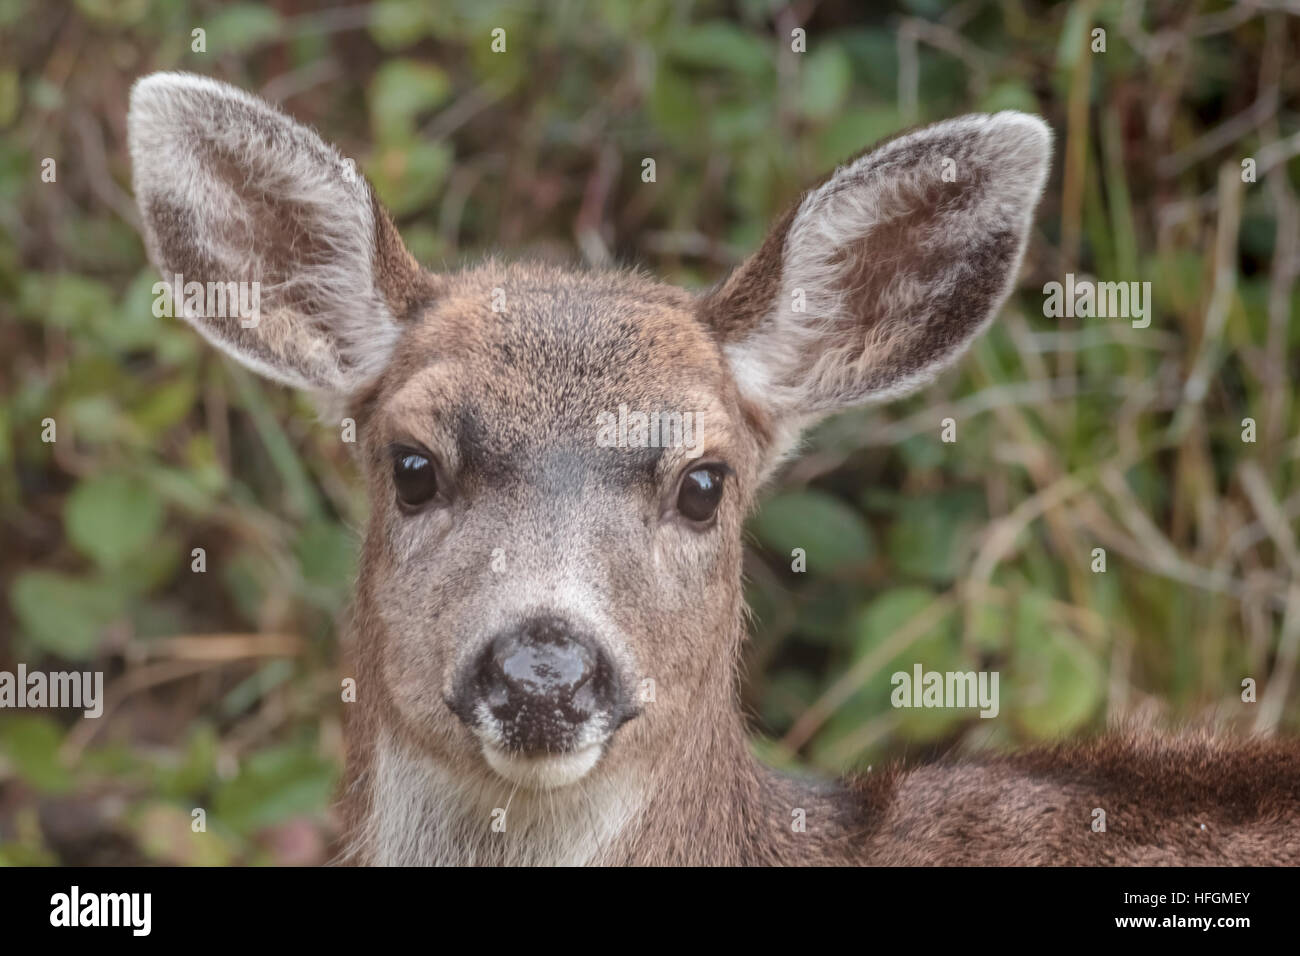 All eyes and ears, a young male deer stares alertly but calmly at the photographer. Stock Photo